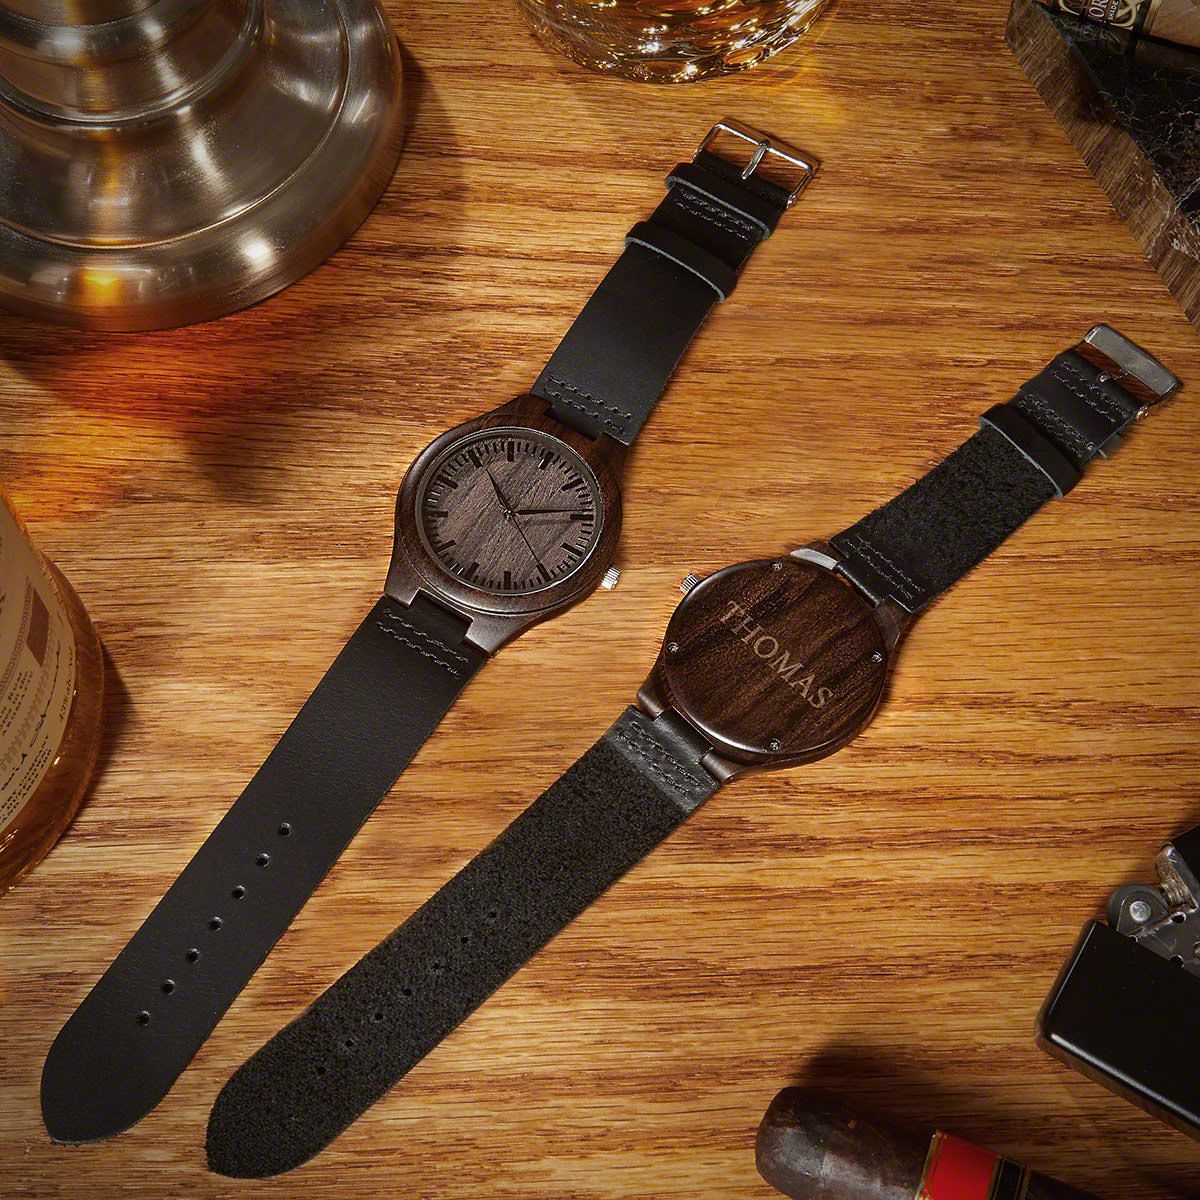 Personalized Watches for Groomsmen Set of 5 Wood Watches with Leather Bands